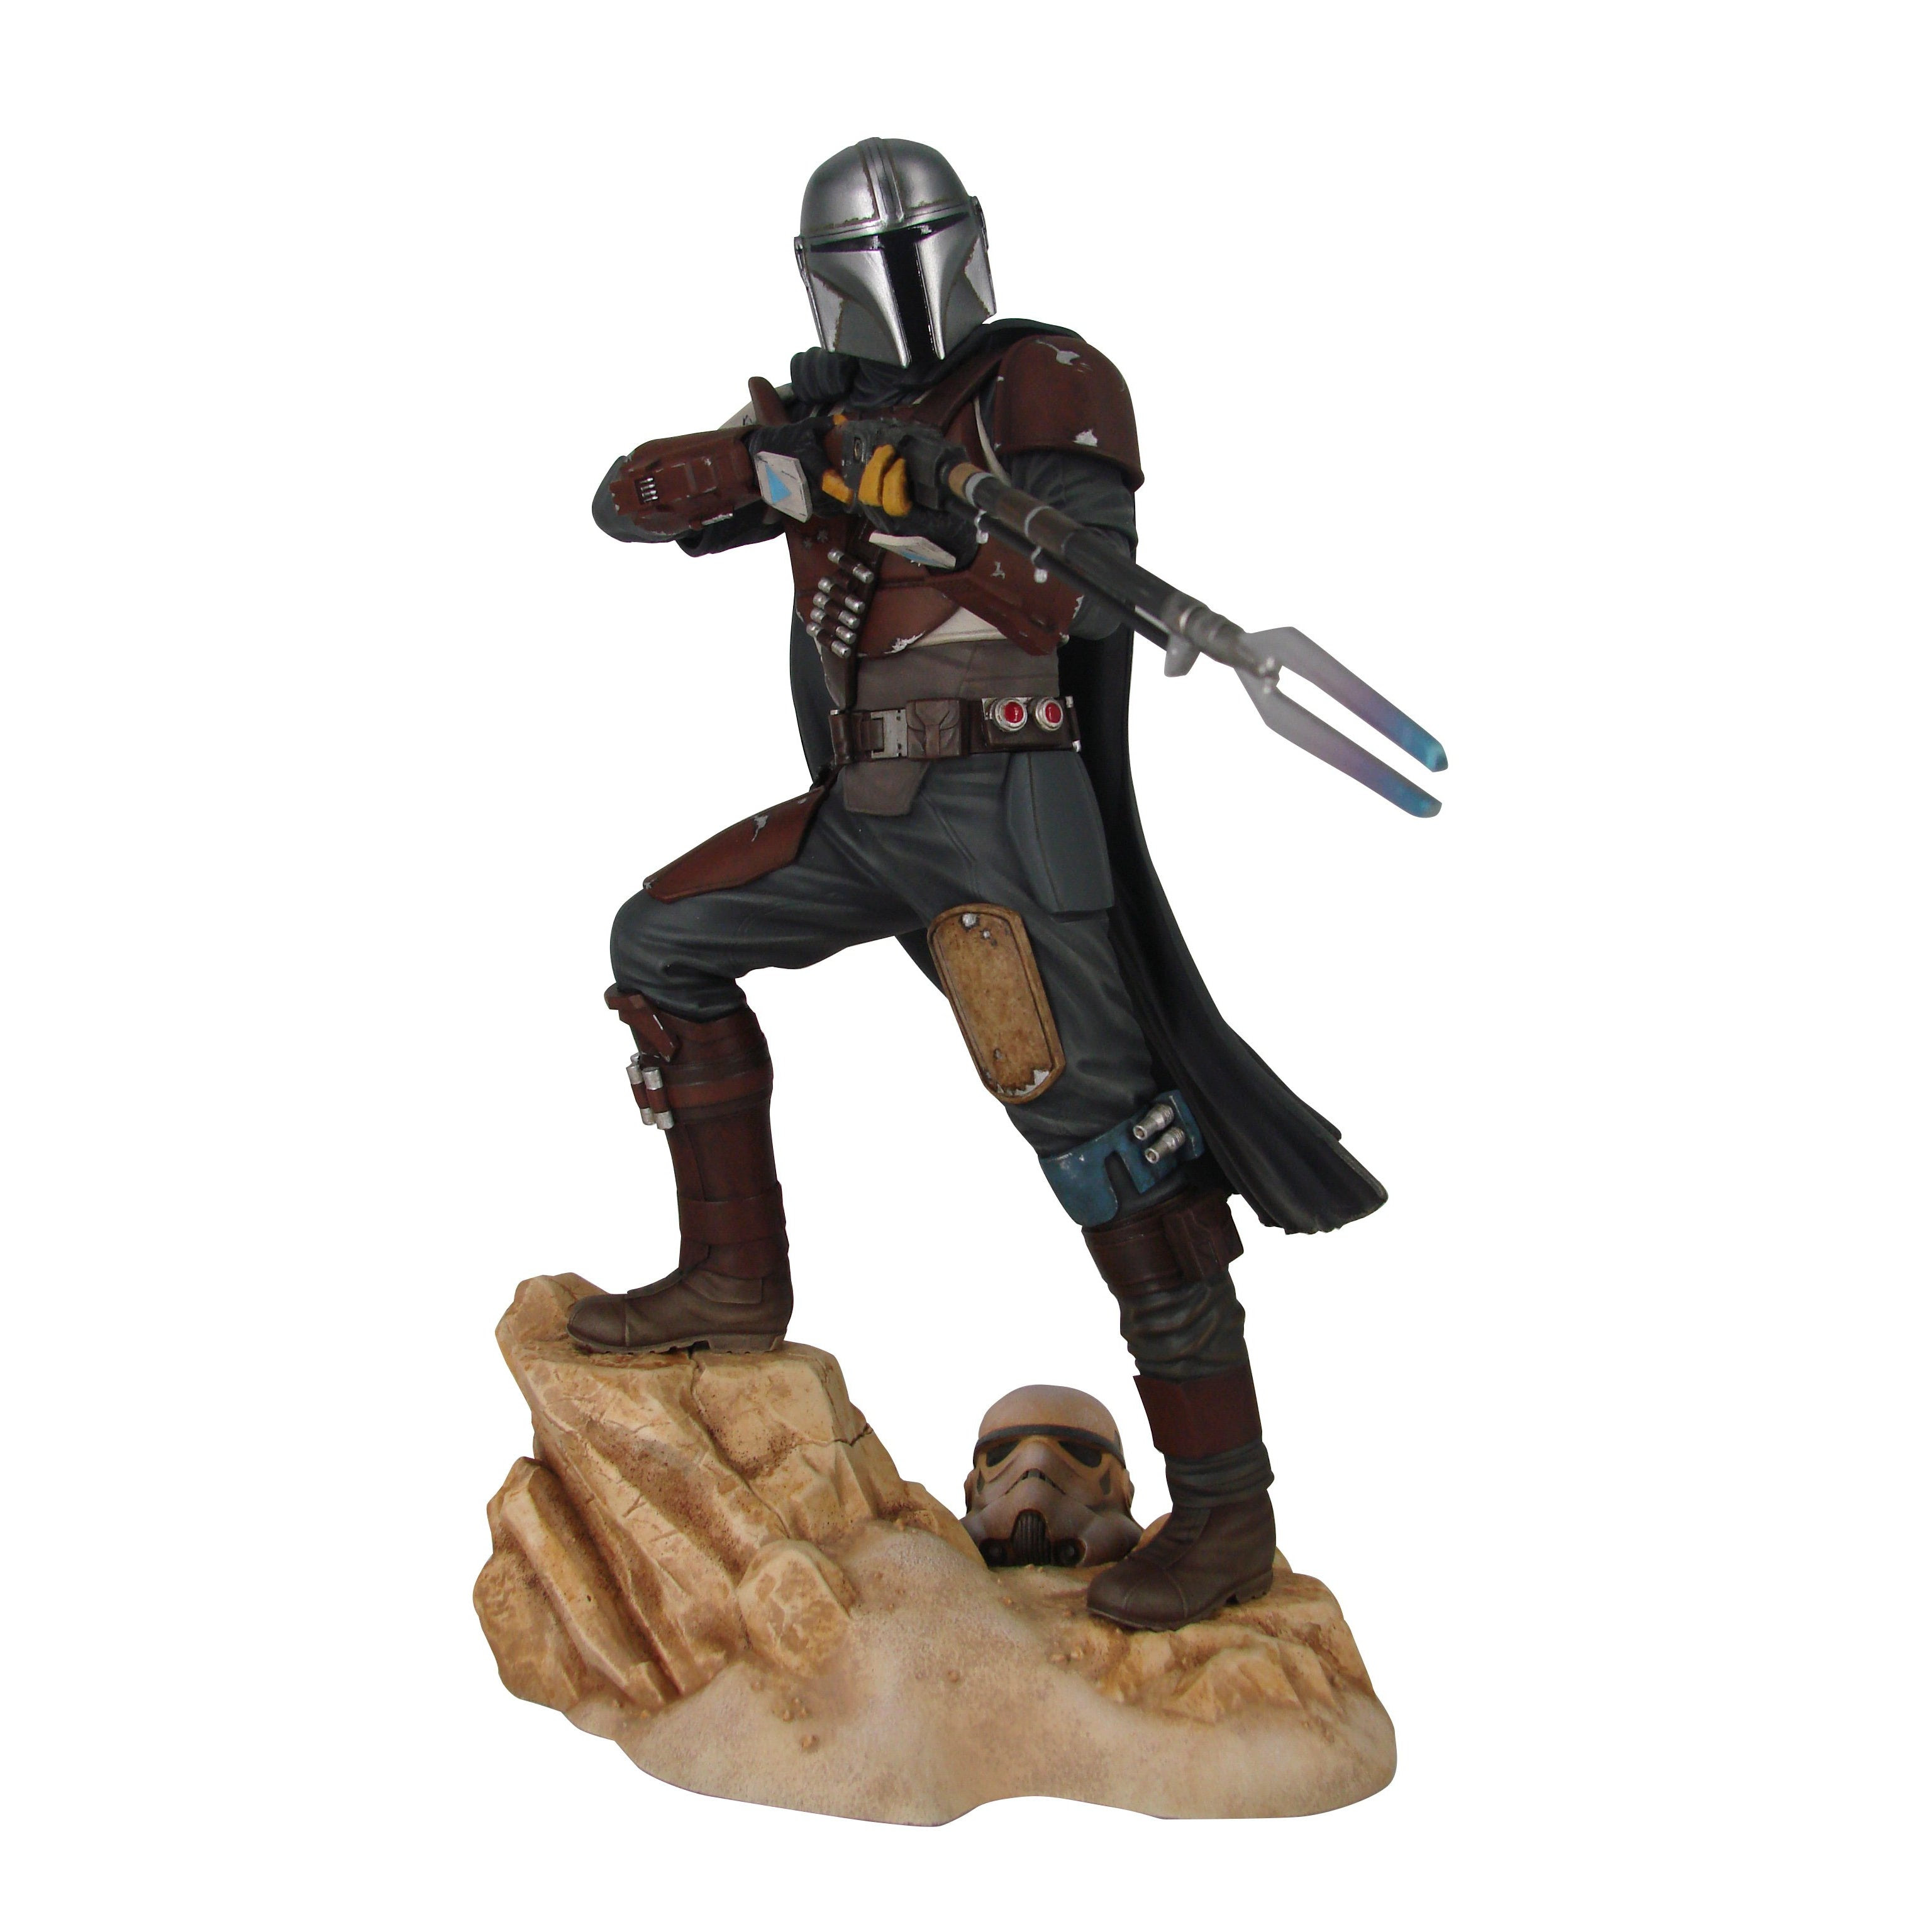 Image of Star Wars Premier Collection The Mandalorian MK1 Statue - AUGUST 2020